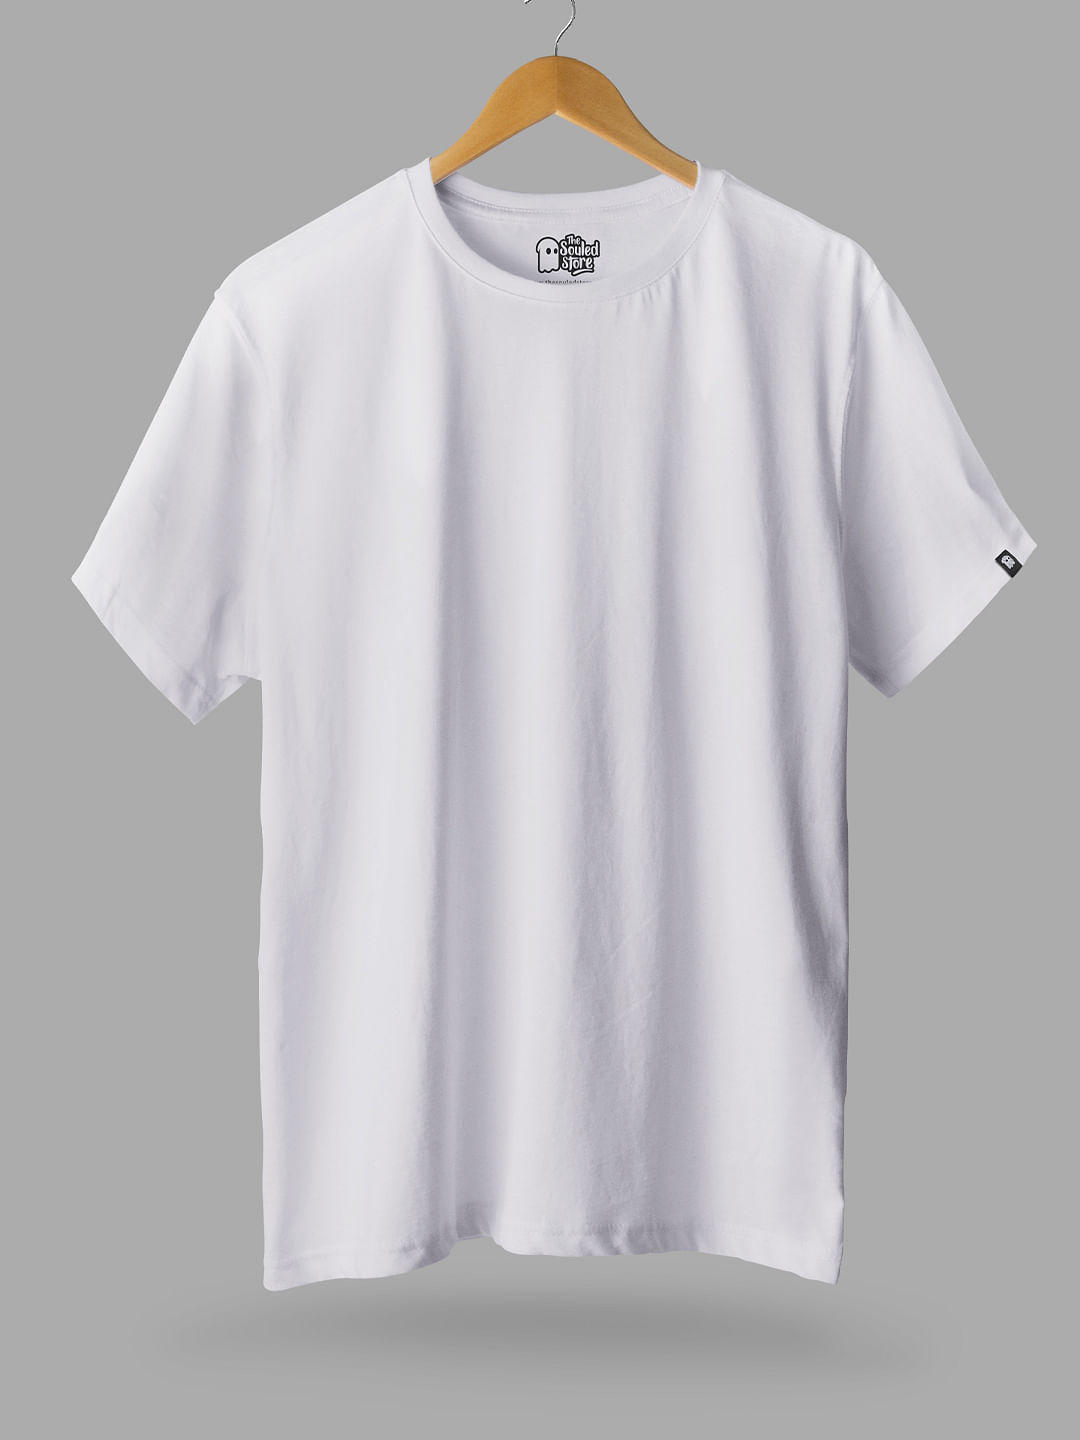 Buy Solids: White T-Shirts, Unisex T-shirts online at The Souled Store.